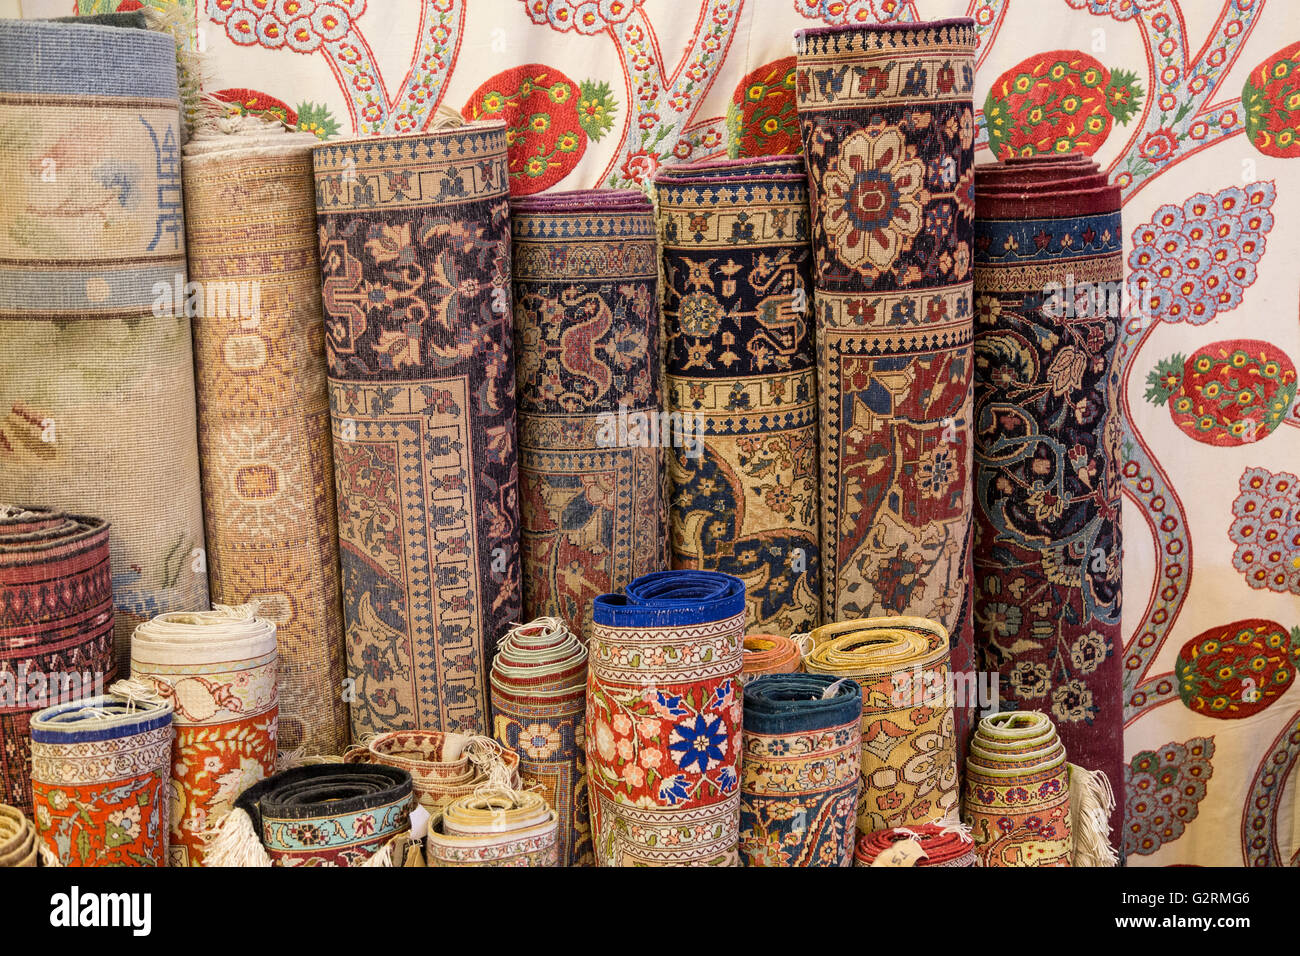 Rolls of carpets and rugs in Turkey Stock Photo